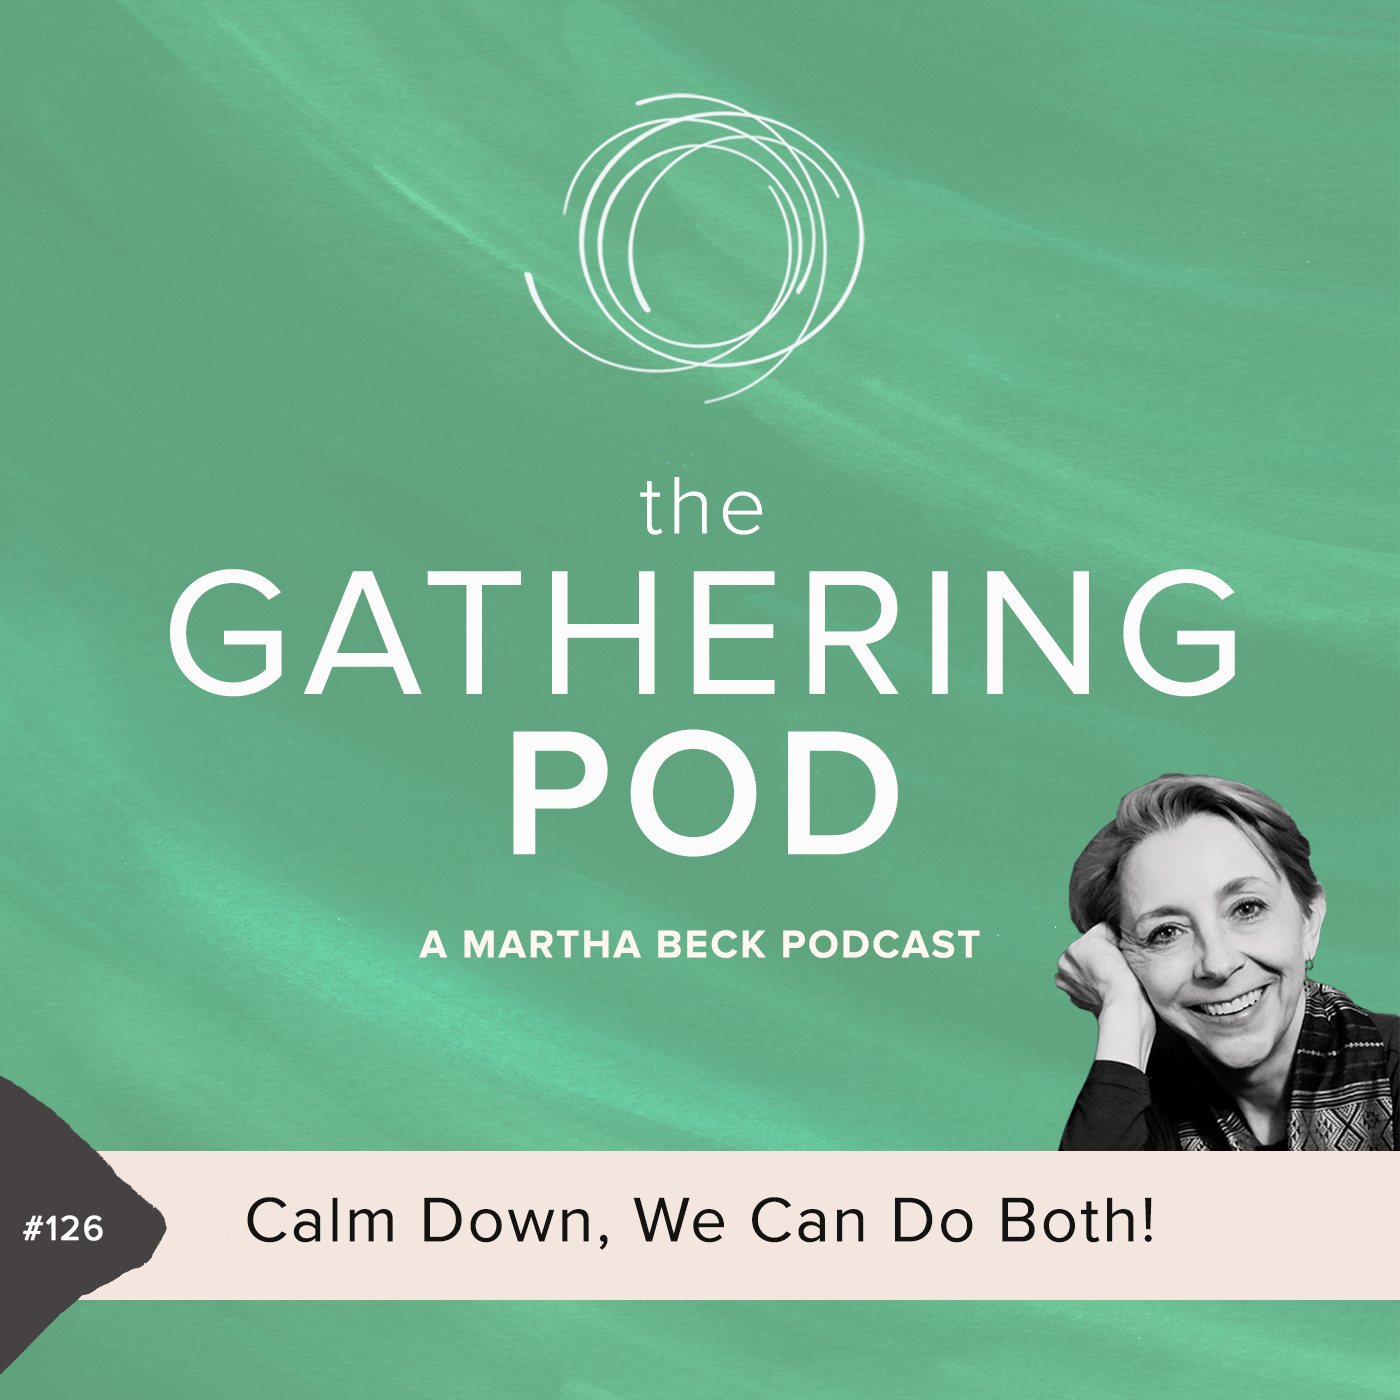 Image for The Gathering Pod A Martha Beck Podcast Episode #126 Calm Down, We Can Do Both!